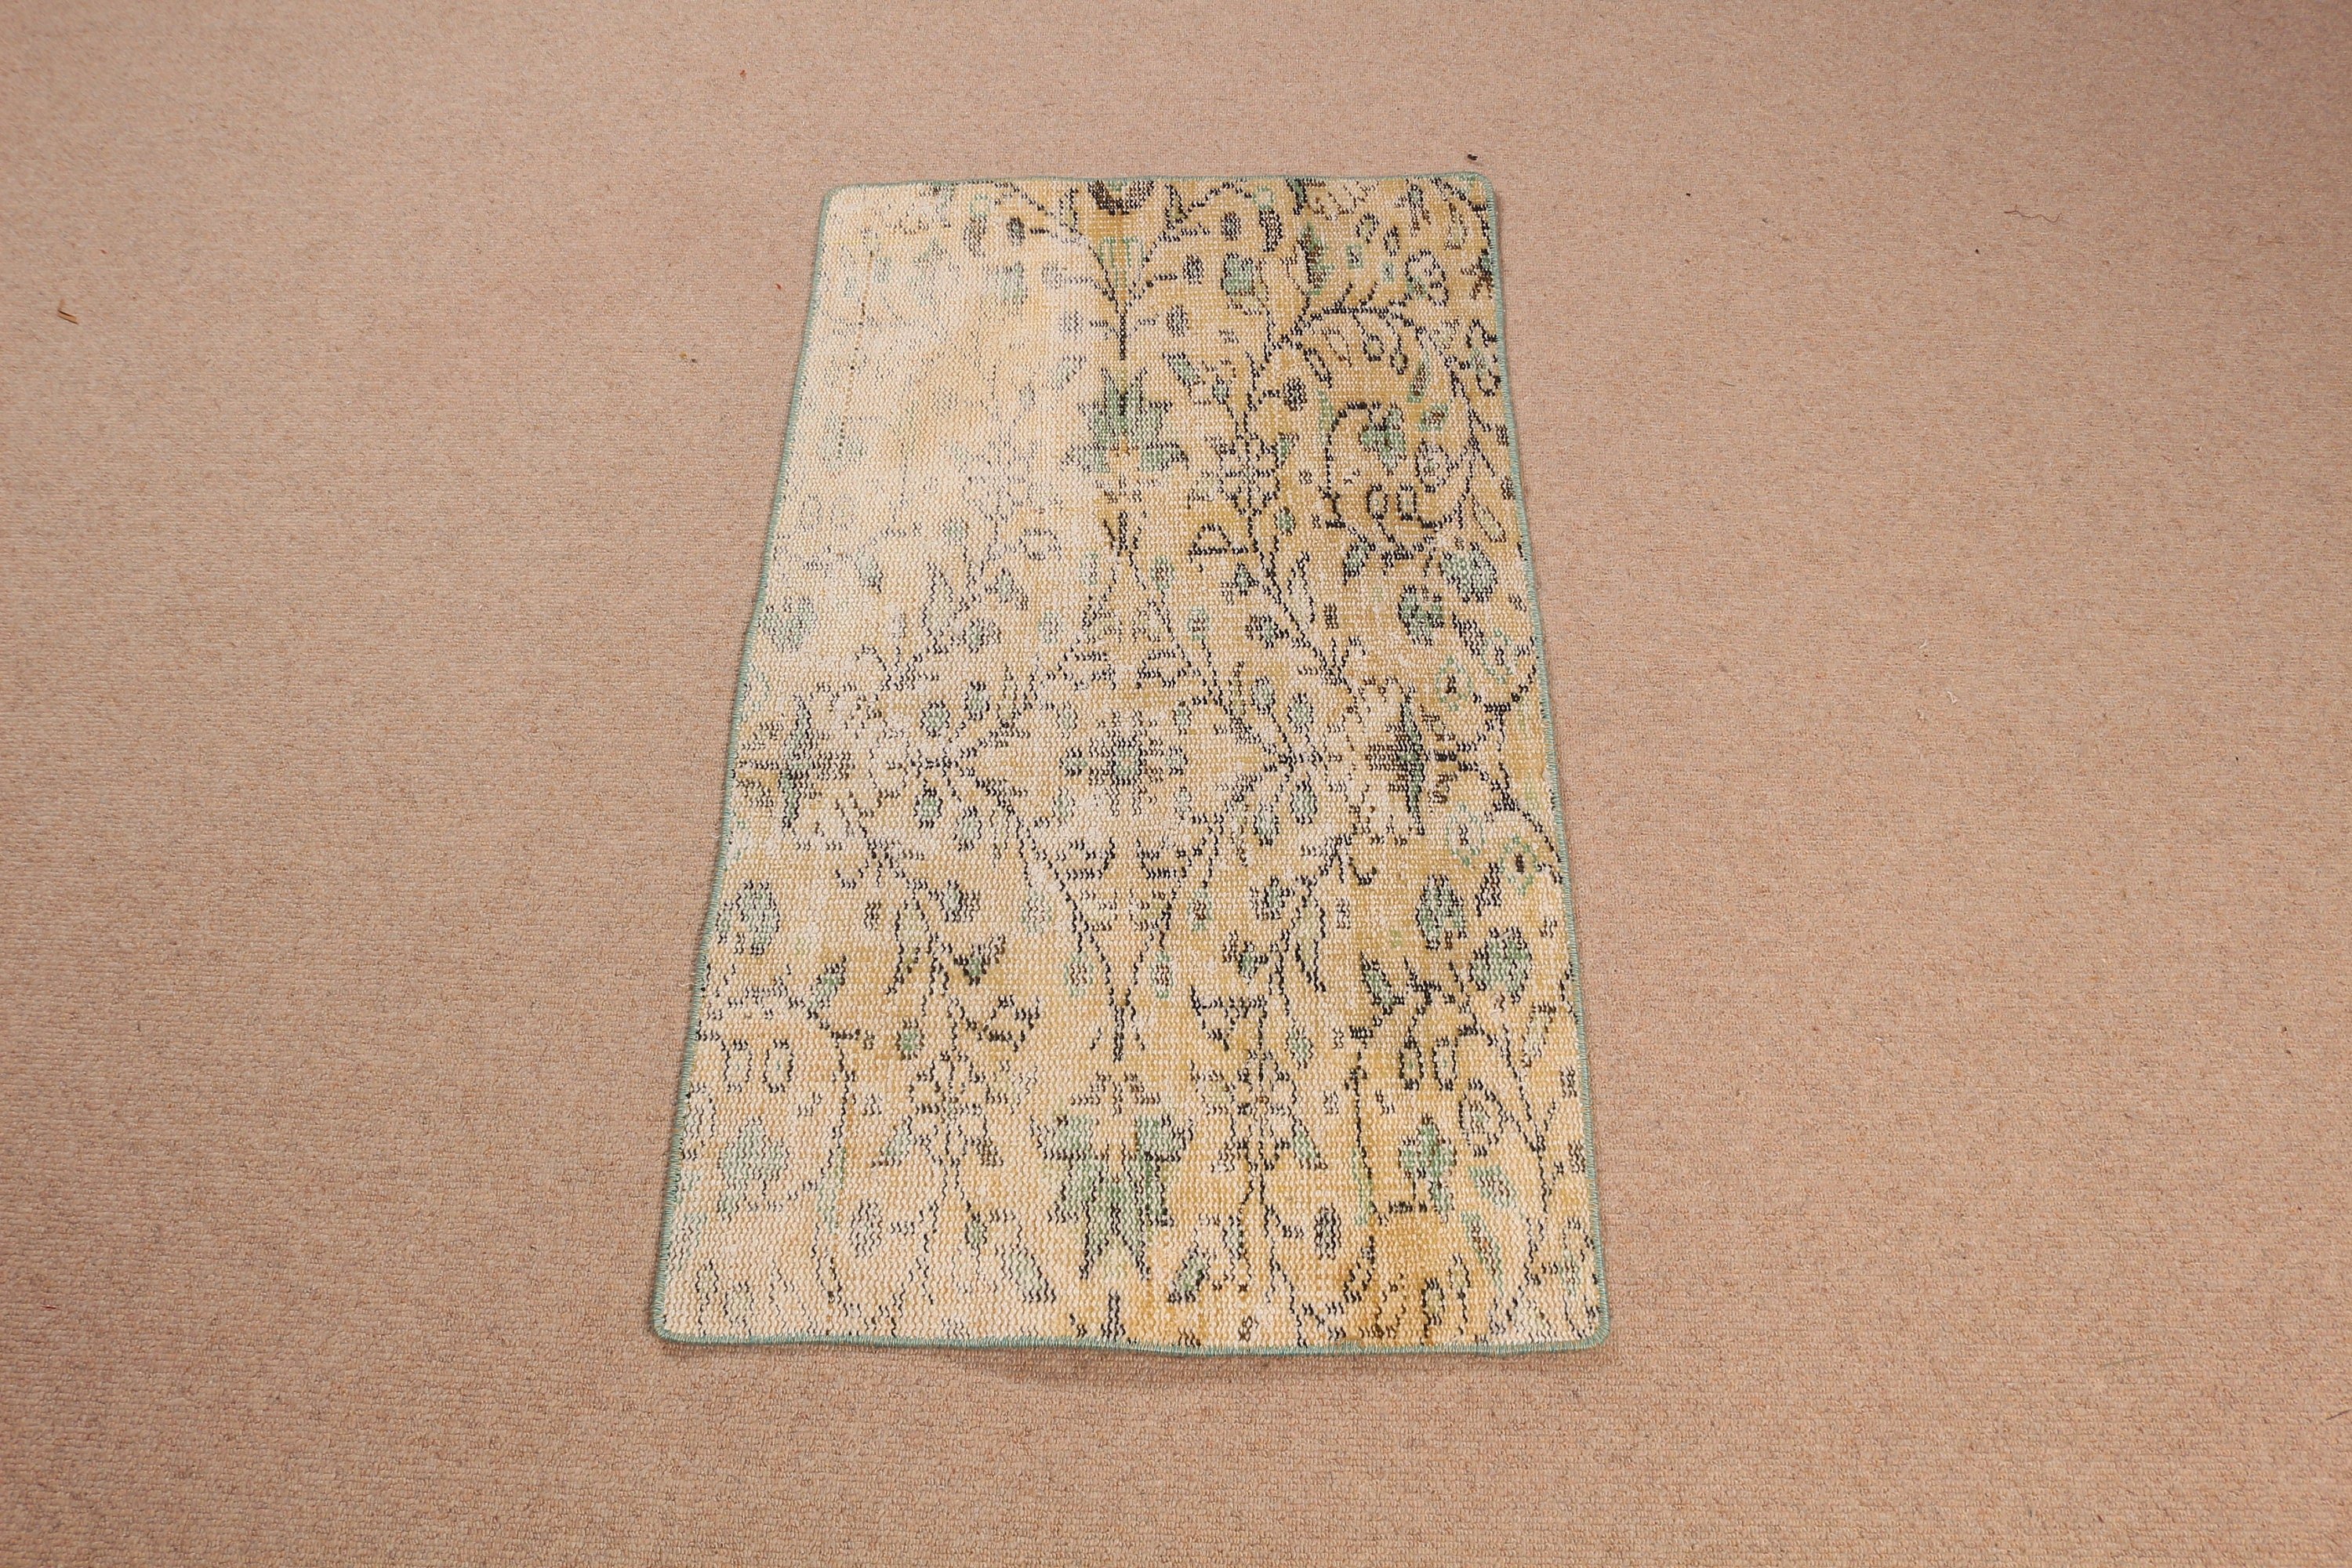 Entry Rugs, Turkish Rugs, Wall Hanging Rug, Rugs for Bath, Beige Floor Rug, Vintage Rug, Kitchen Rugs, 2x3.5 ft Small Rug, Oushak Rugs